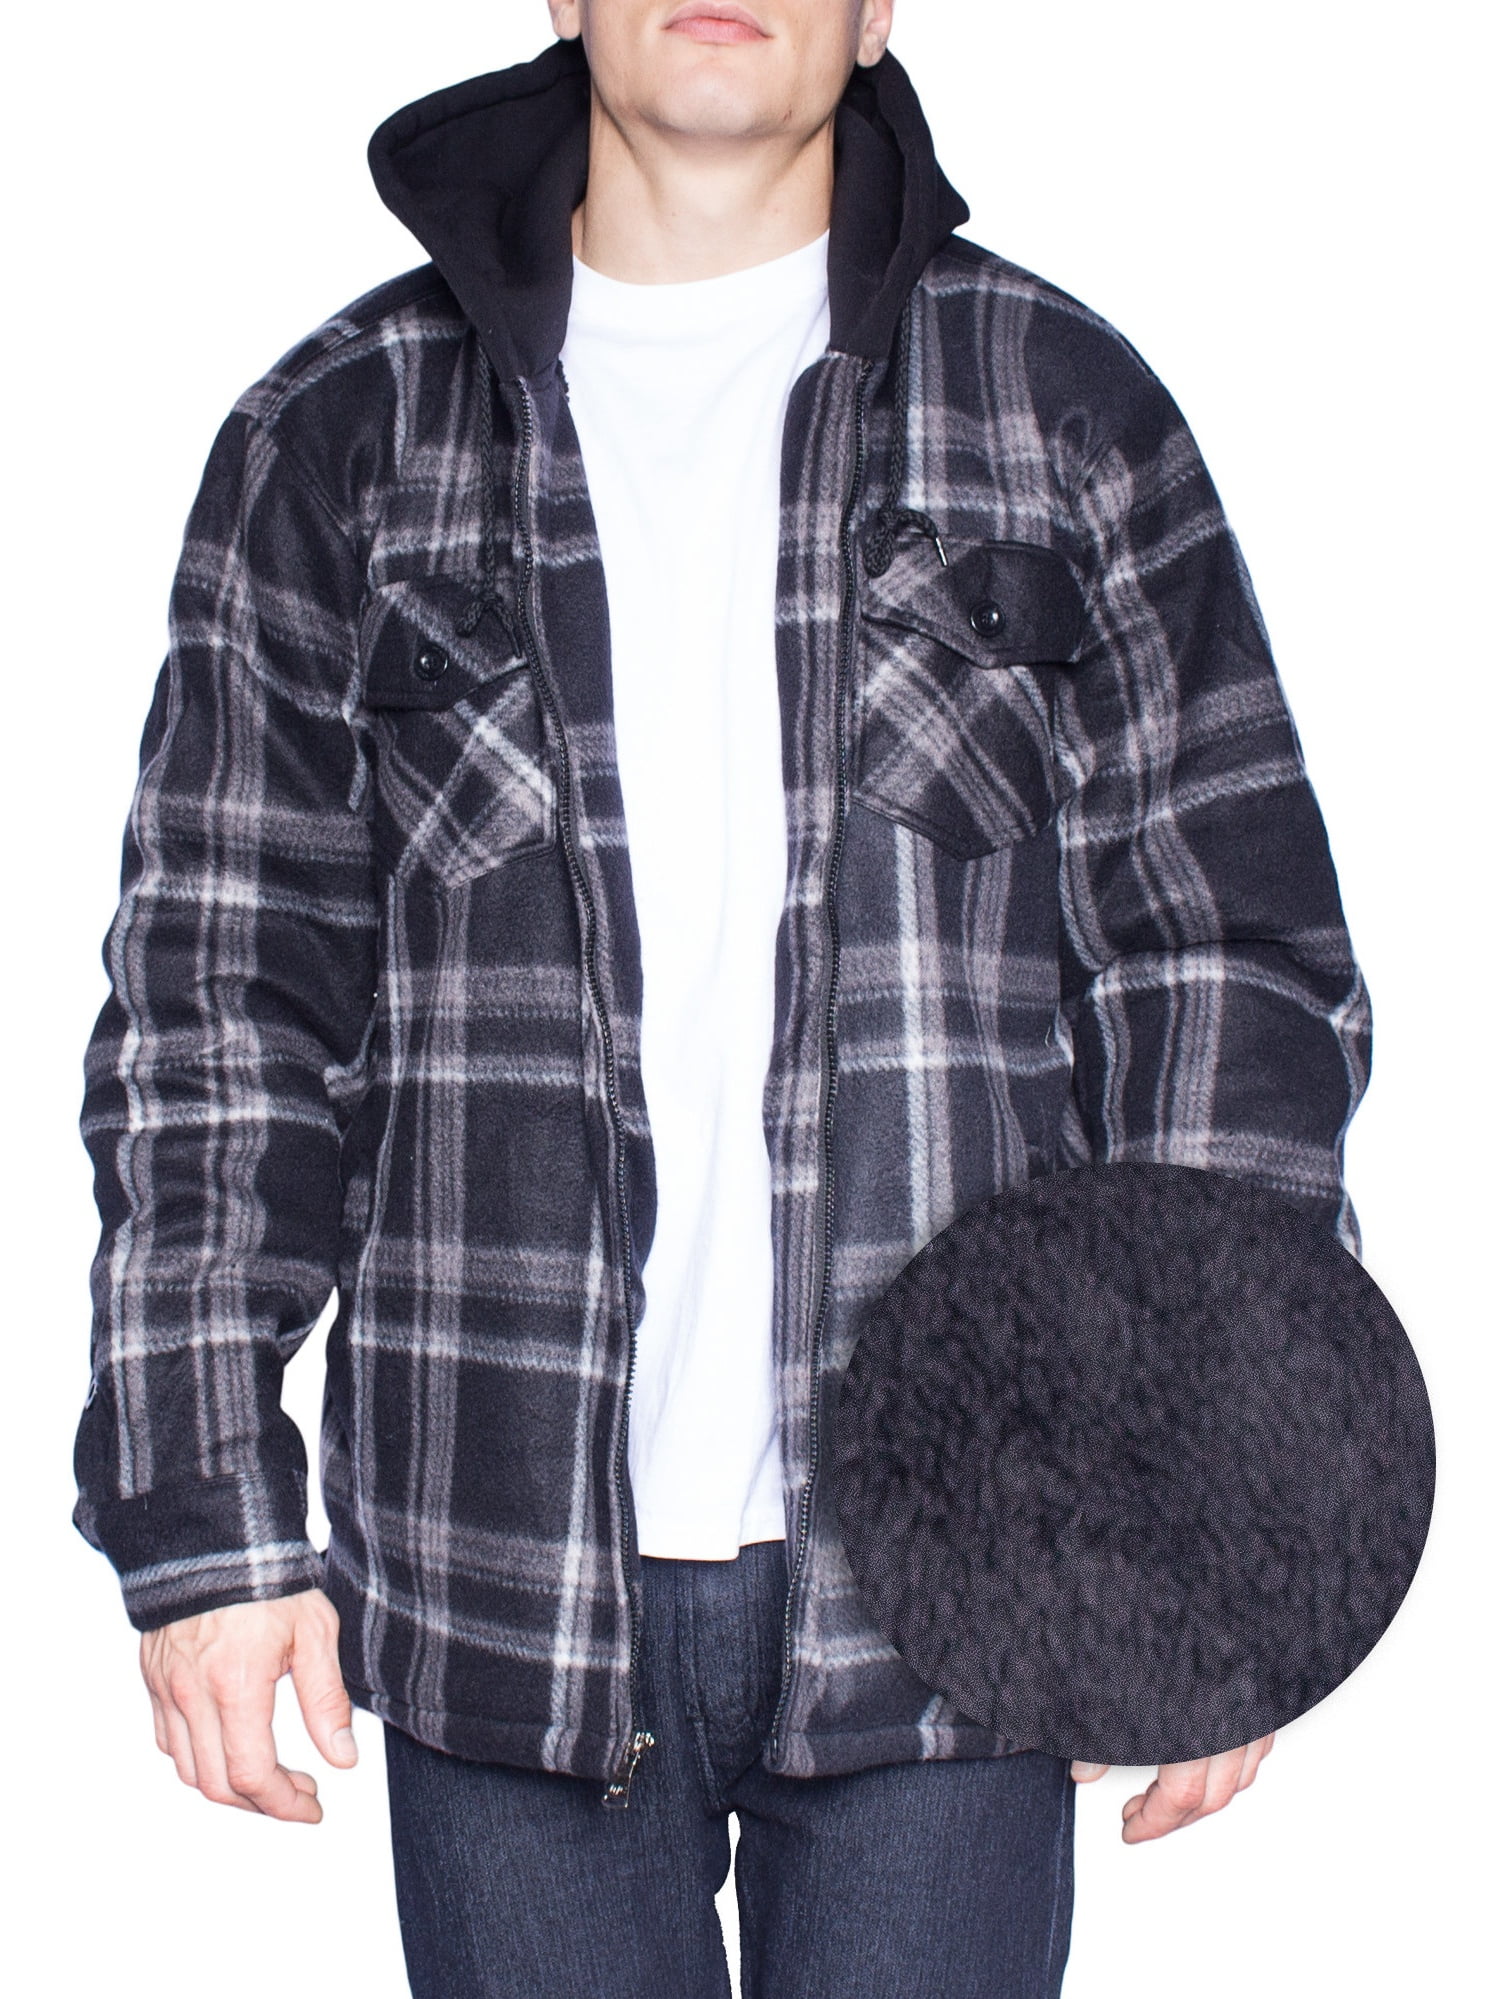 Visive Mens Heavy Flannel Shirt Jacket for Mens Big and Tall Zip Up Fleece W/Hood Size M 5XL